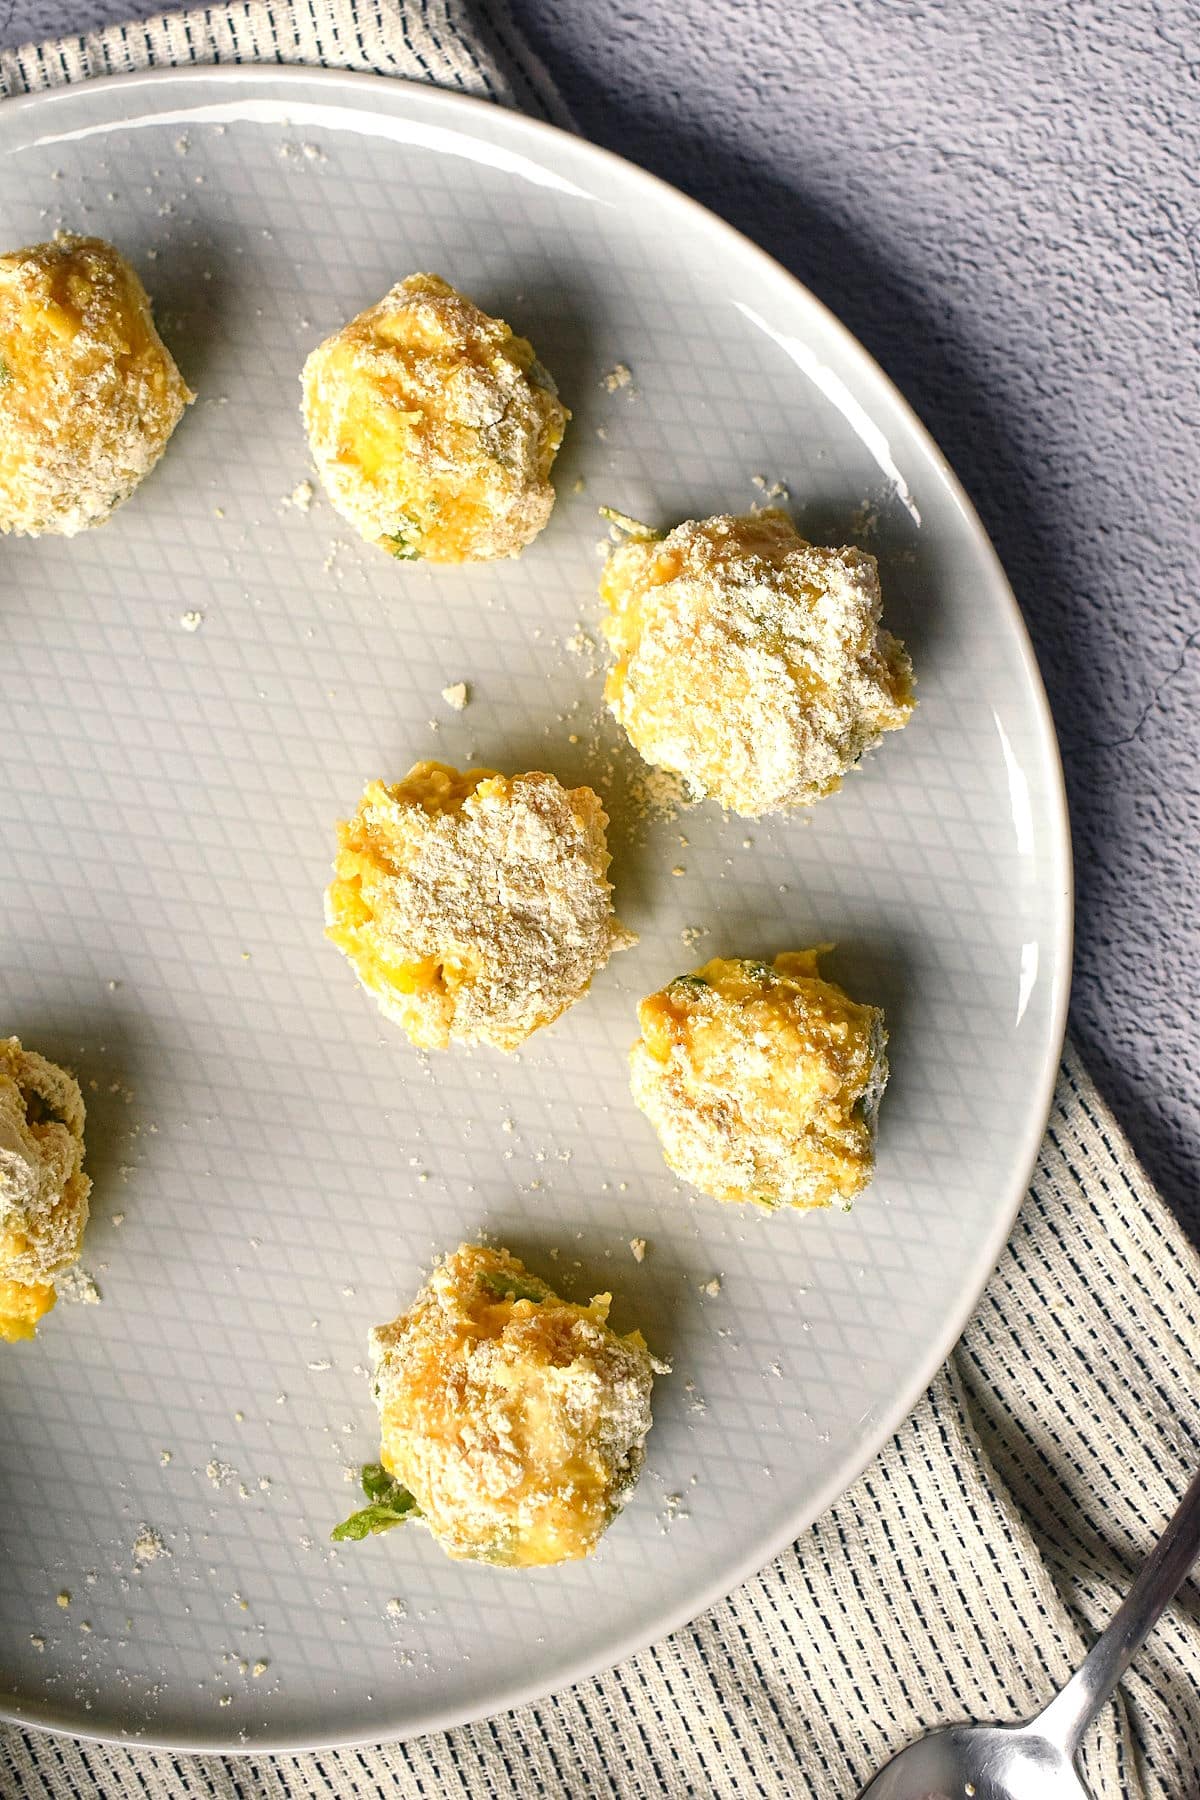 Raw corn nuggets with flour coating on plate.